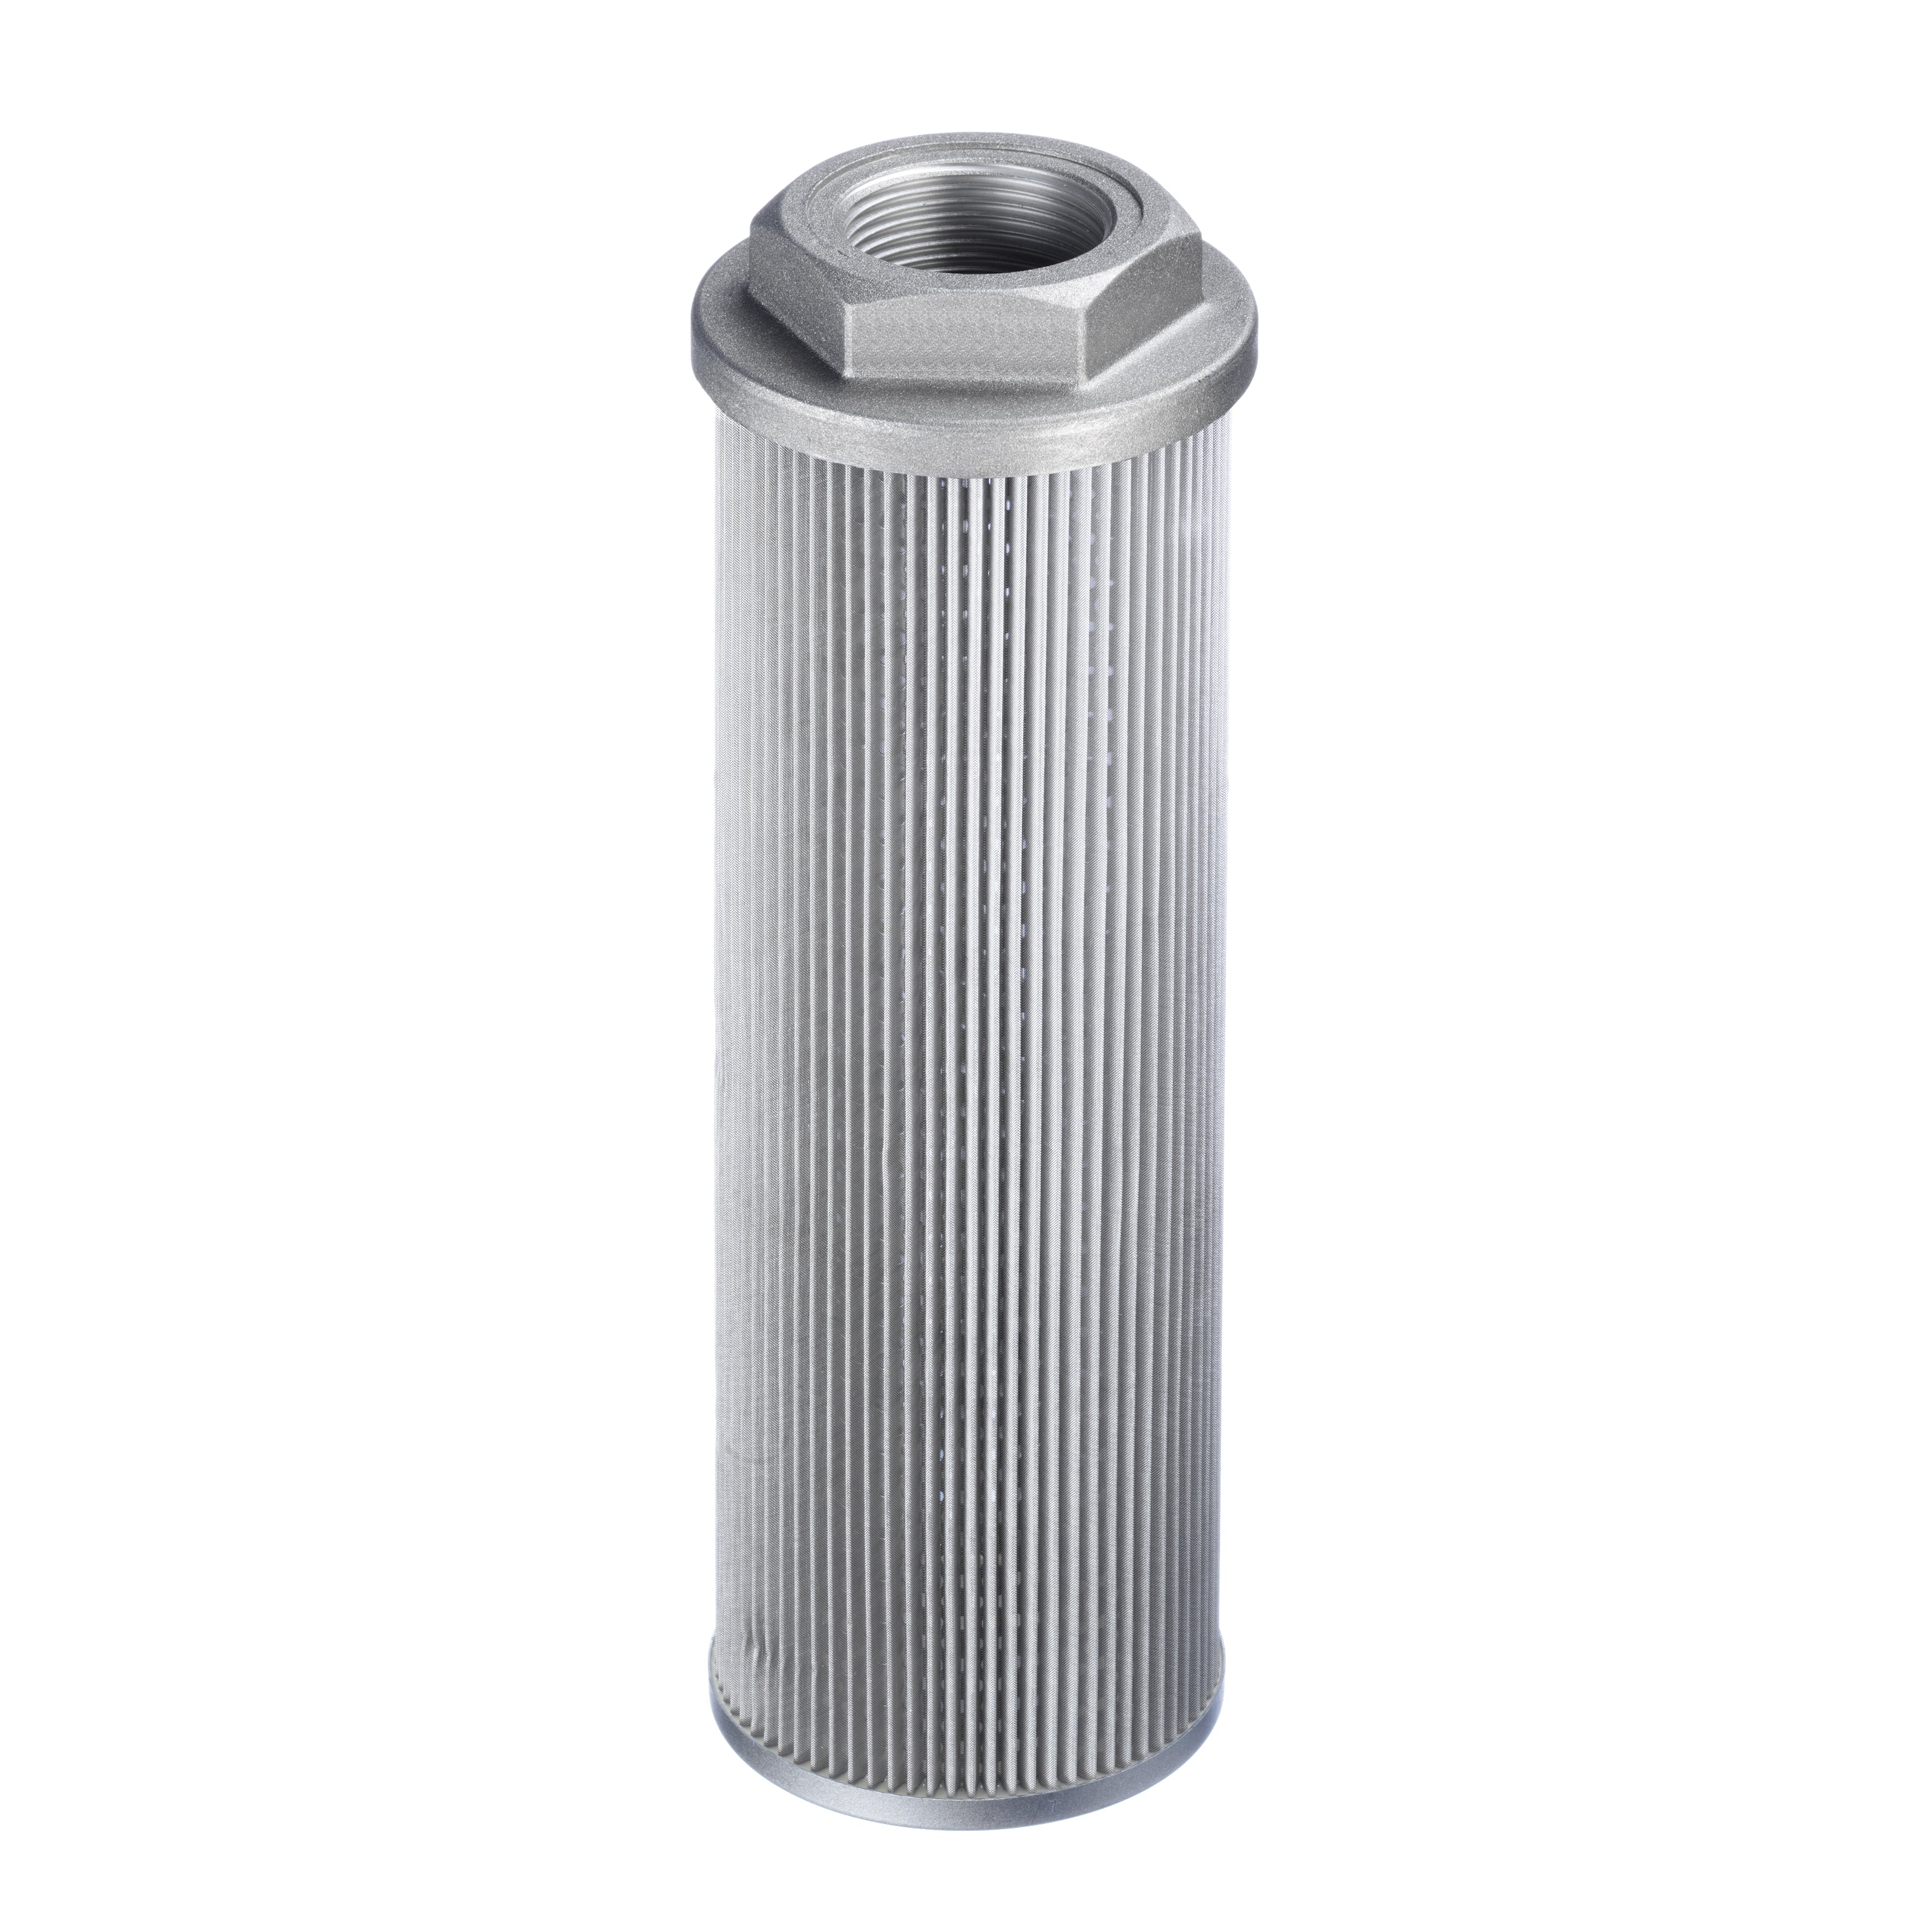 SUS-068-N12-105-125-A-O : Stauff Suction Strainer, Aluminum End Cap, 3/4" NPT, 6.5GPM, 125 Micron, No Bypass